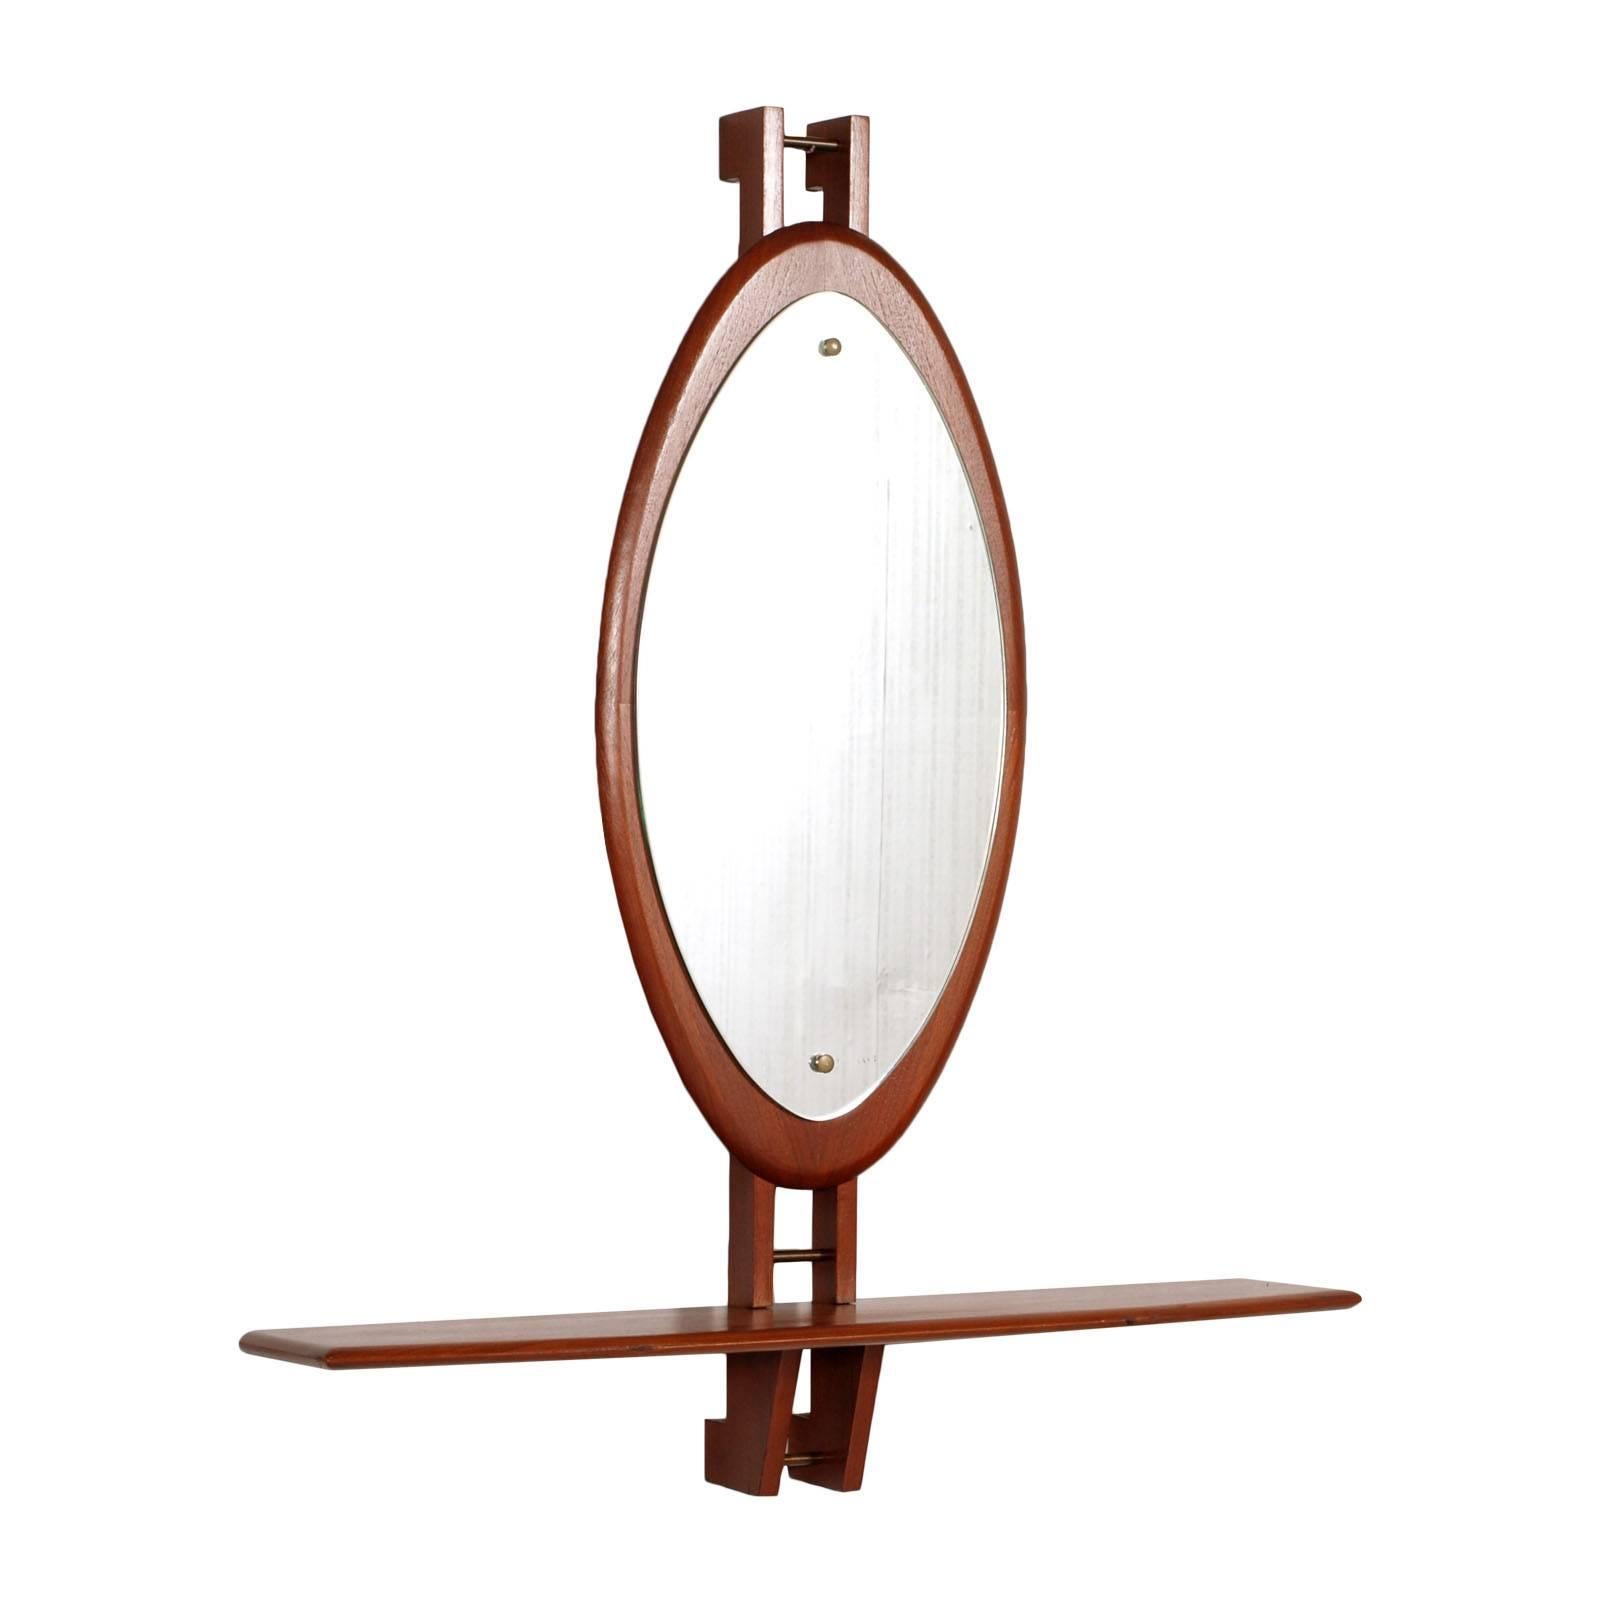 Exceptional Mid-Century modern console and wall mirror by Clausen & Son in Teack, period 1960s. 

Measures cm: H 108, W 90, D 25.